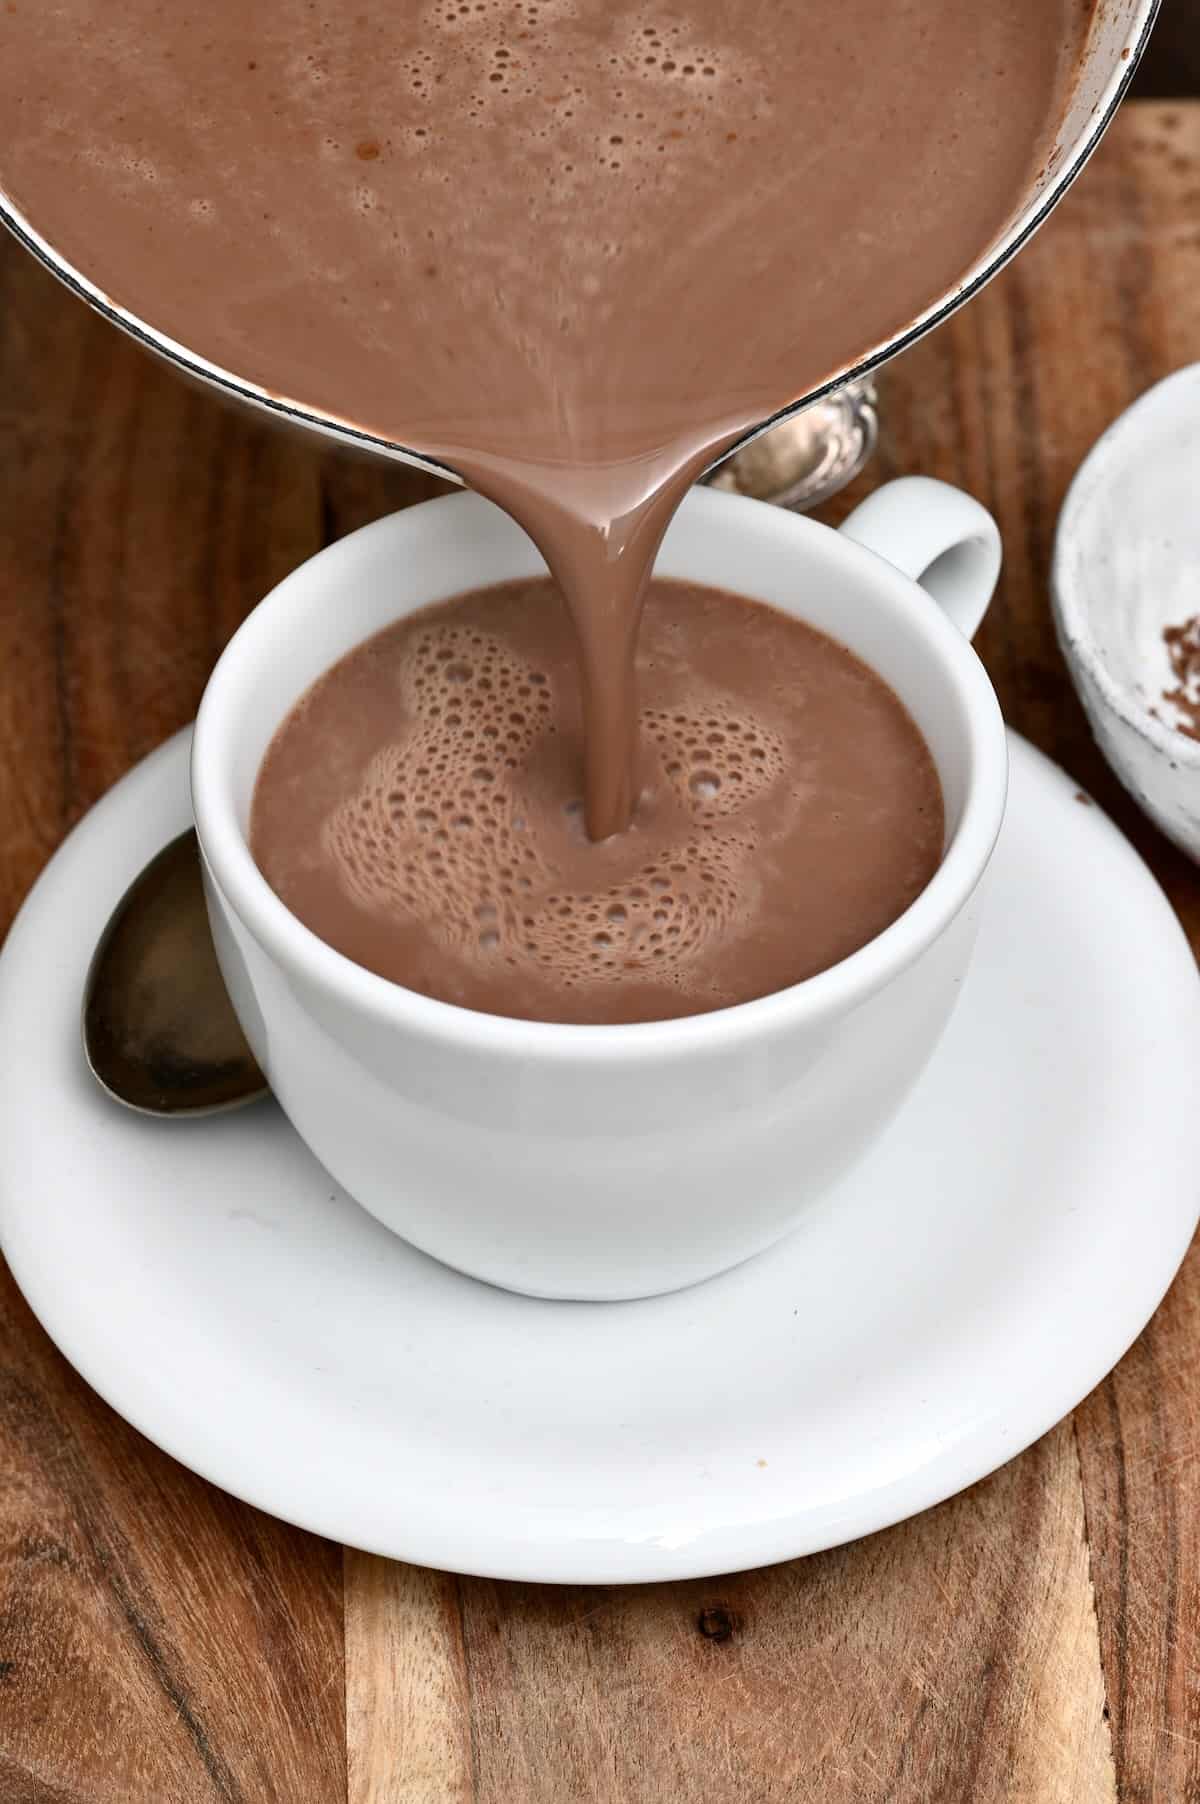 Pouring hot cocoa in a cup